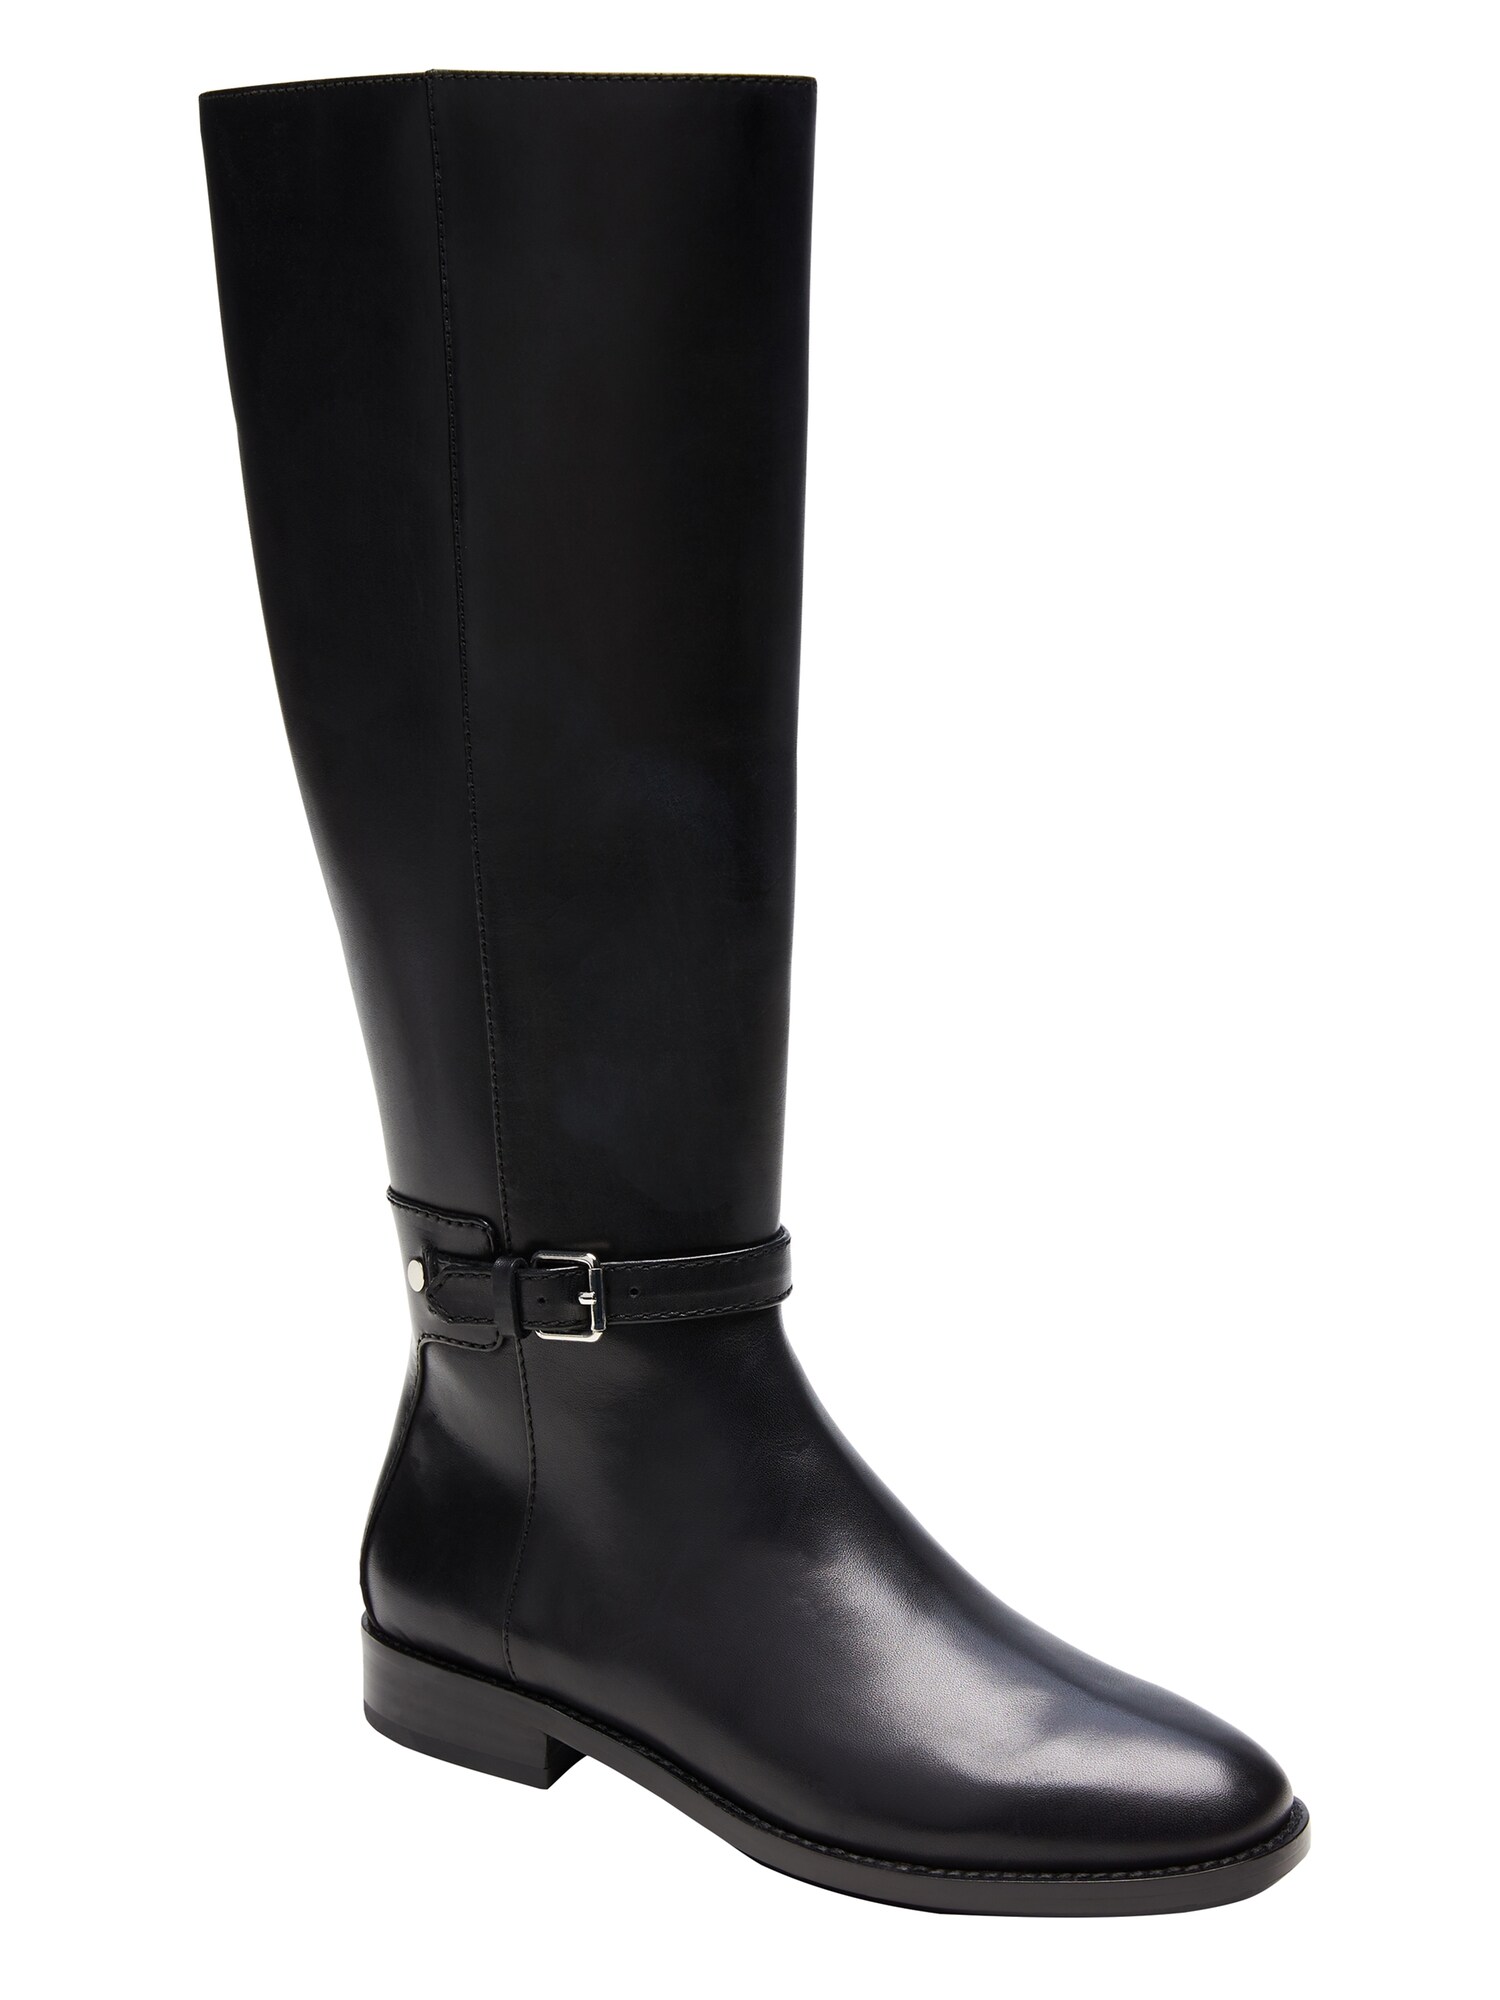 black leather riding boots womens